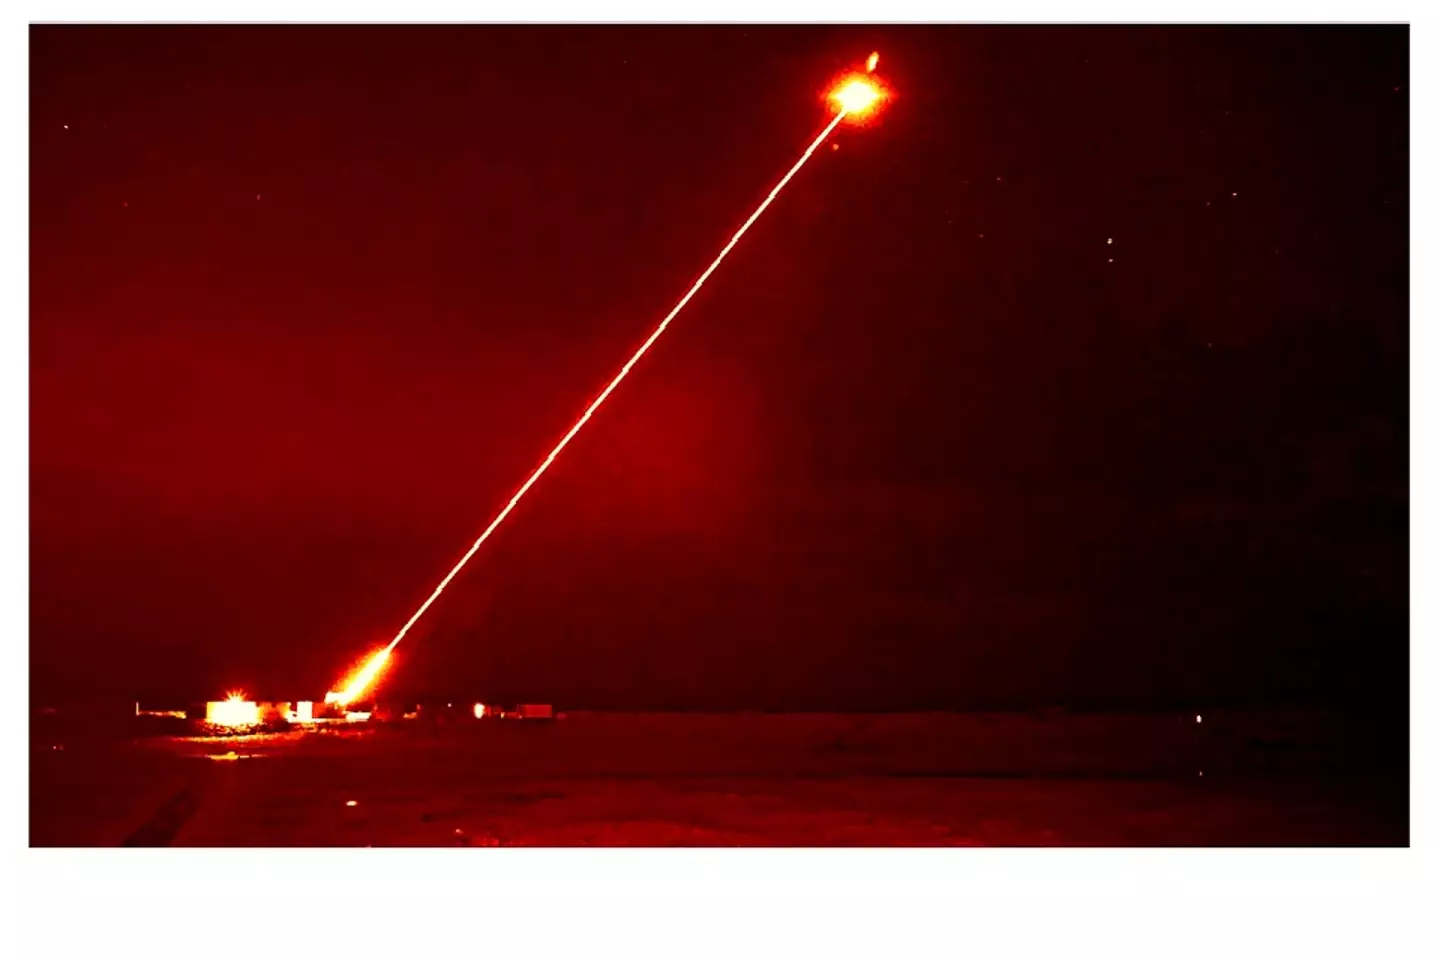 The UK-made laser provides Armed Forces with a new way to engage with any visible target.